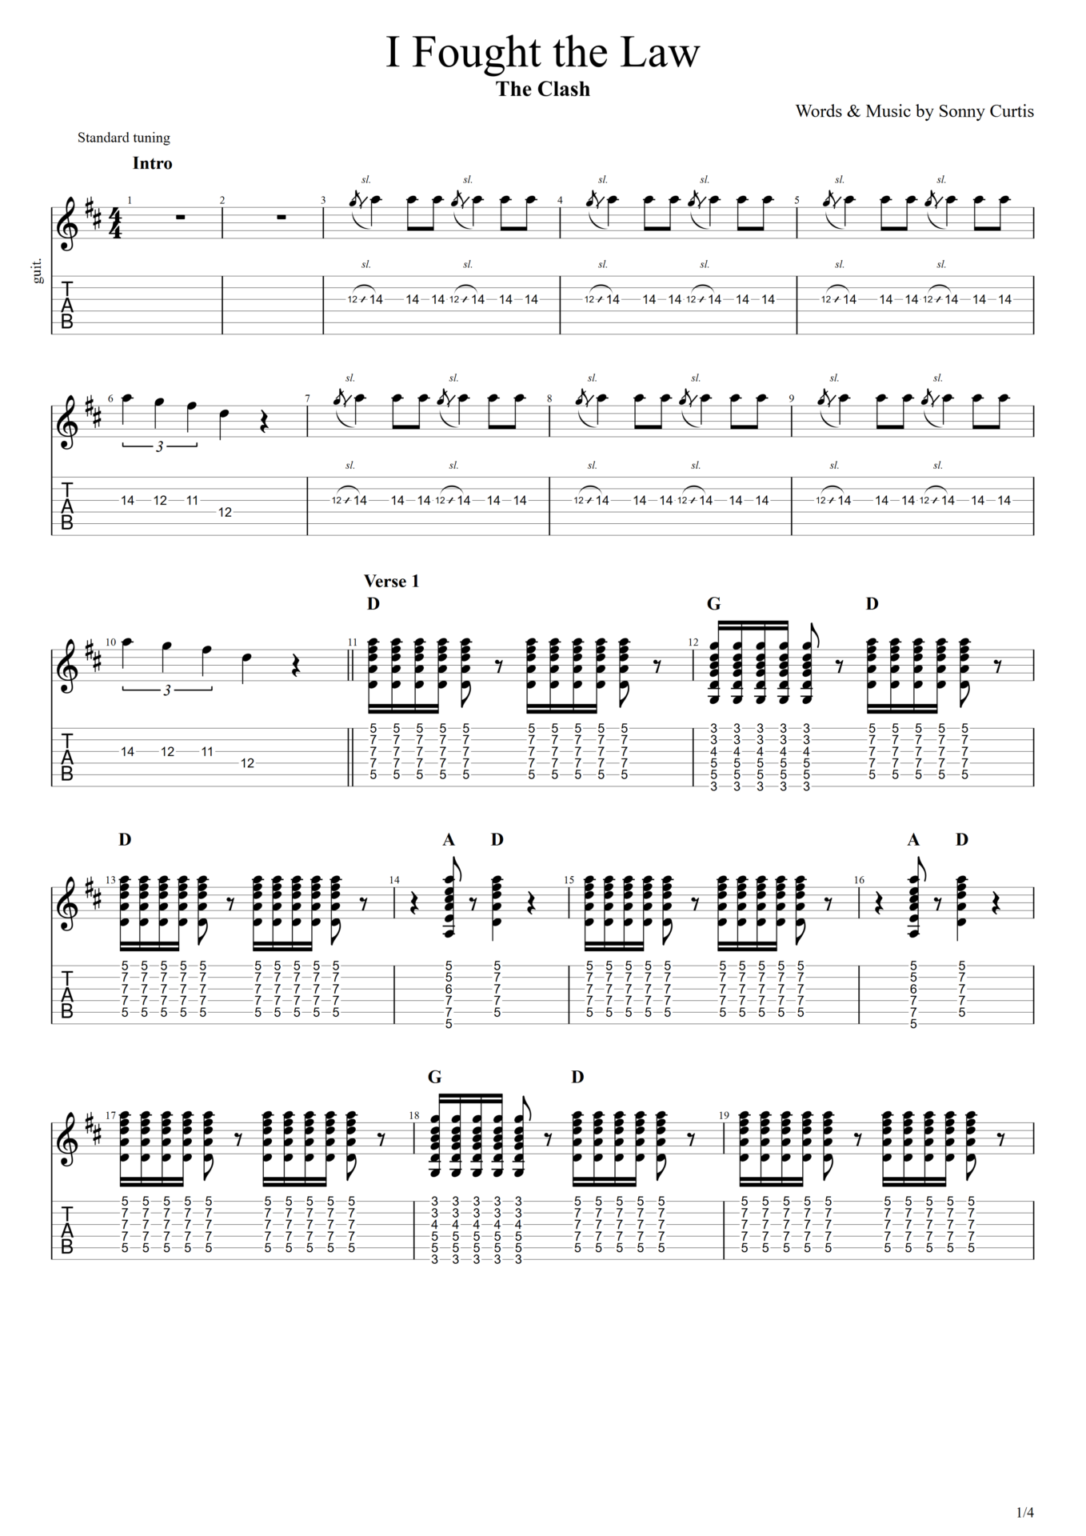 The Clash “i Fought The Law” Guitar Chords And Tab Guitar Jam